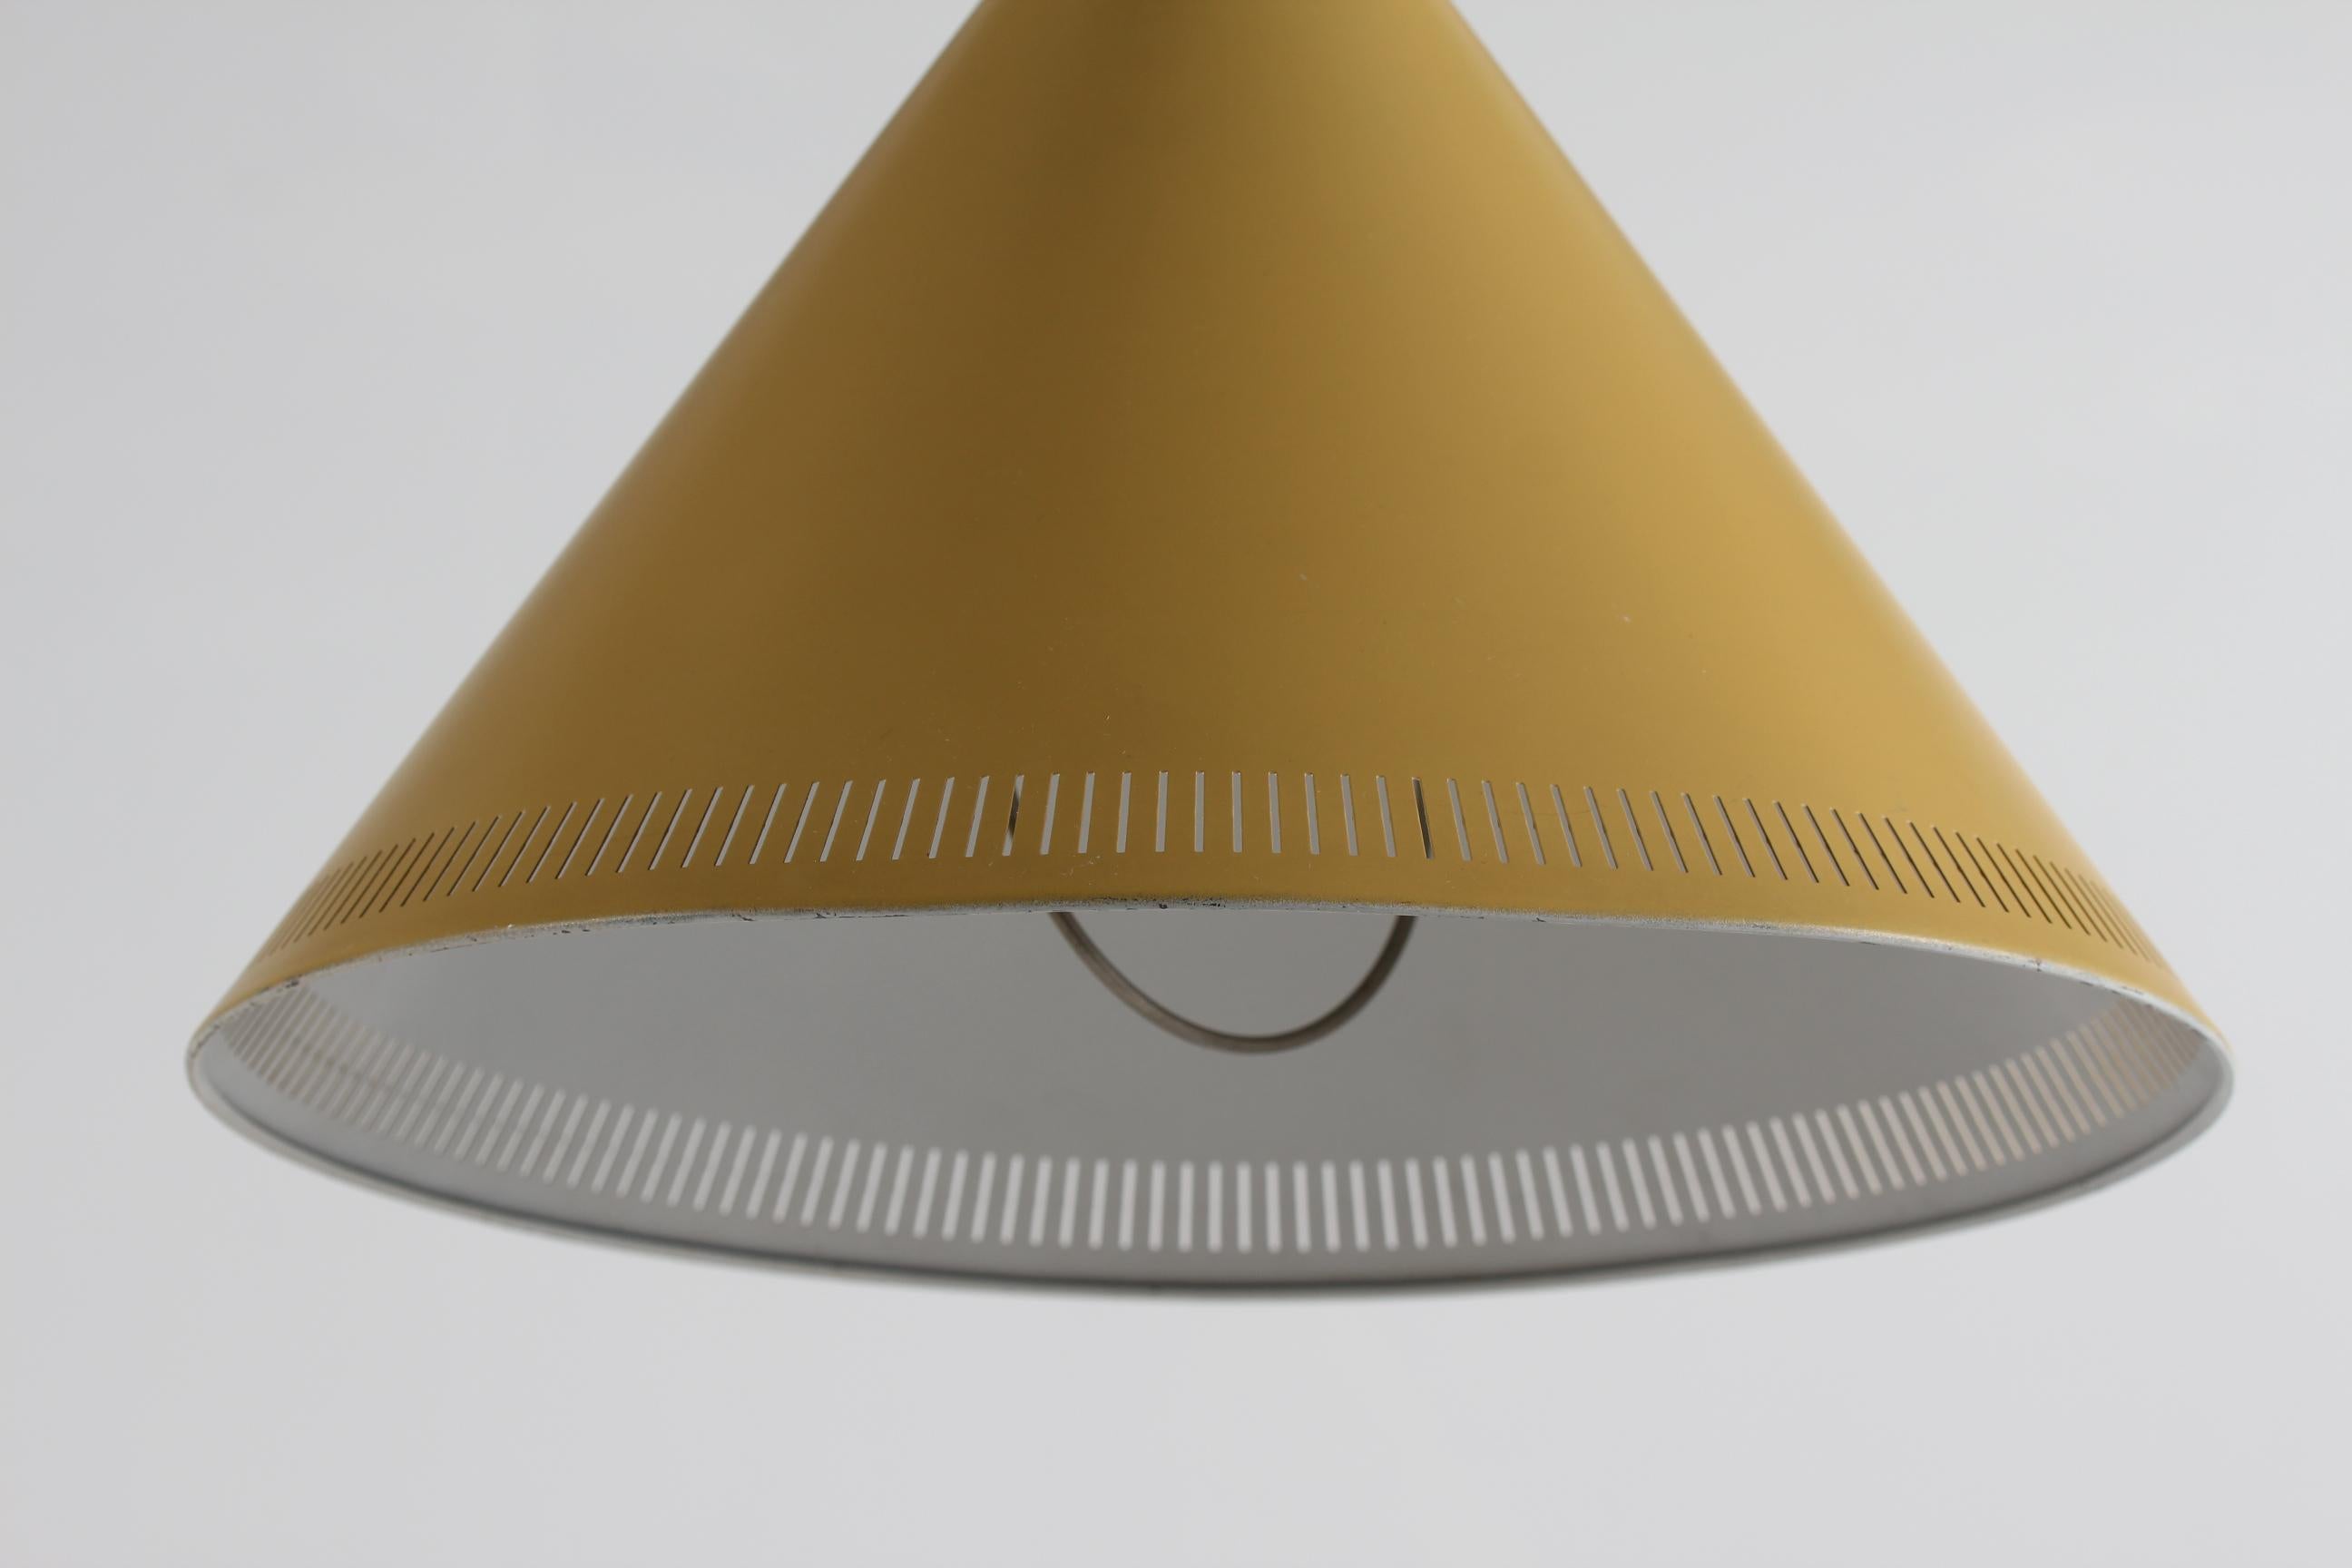 Here is a rare pair of conical pendant lights 